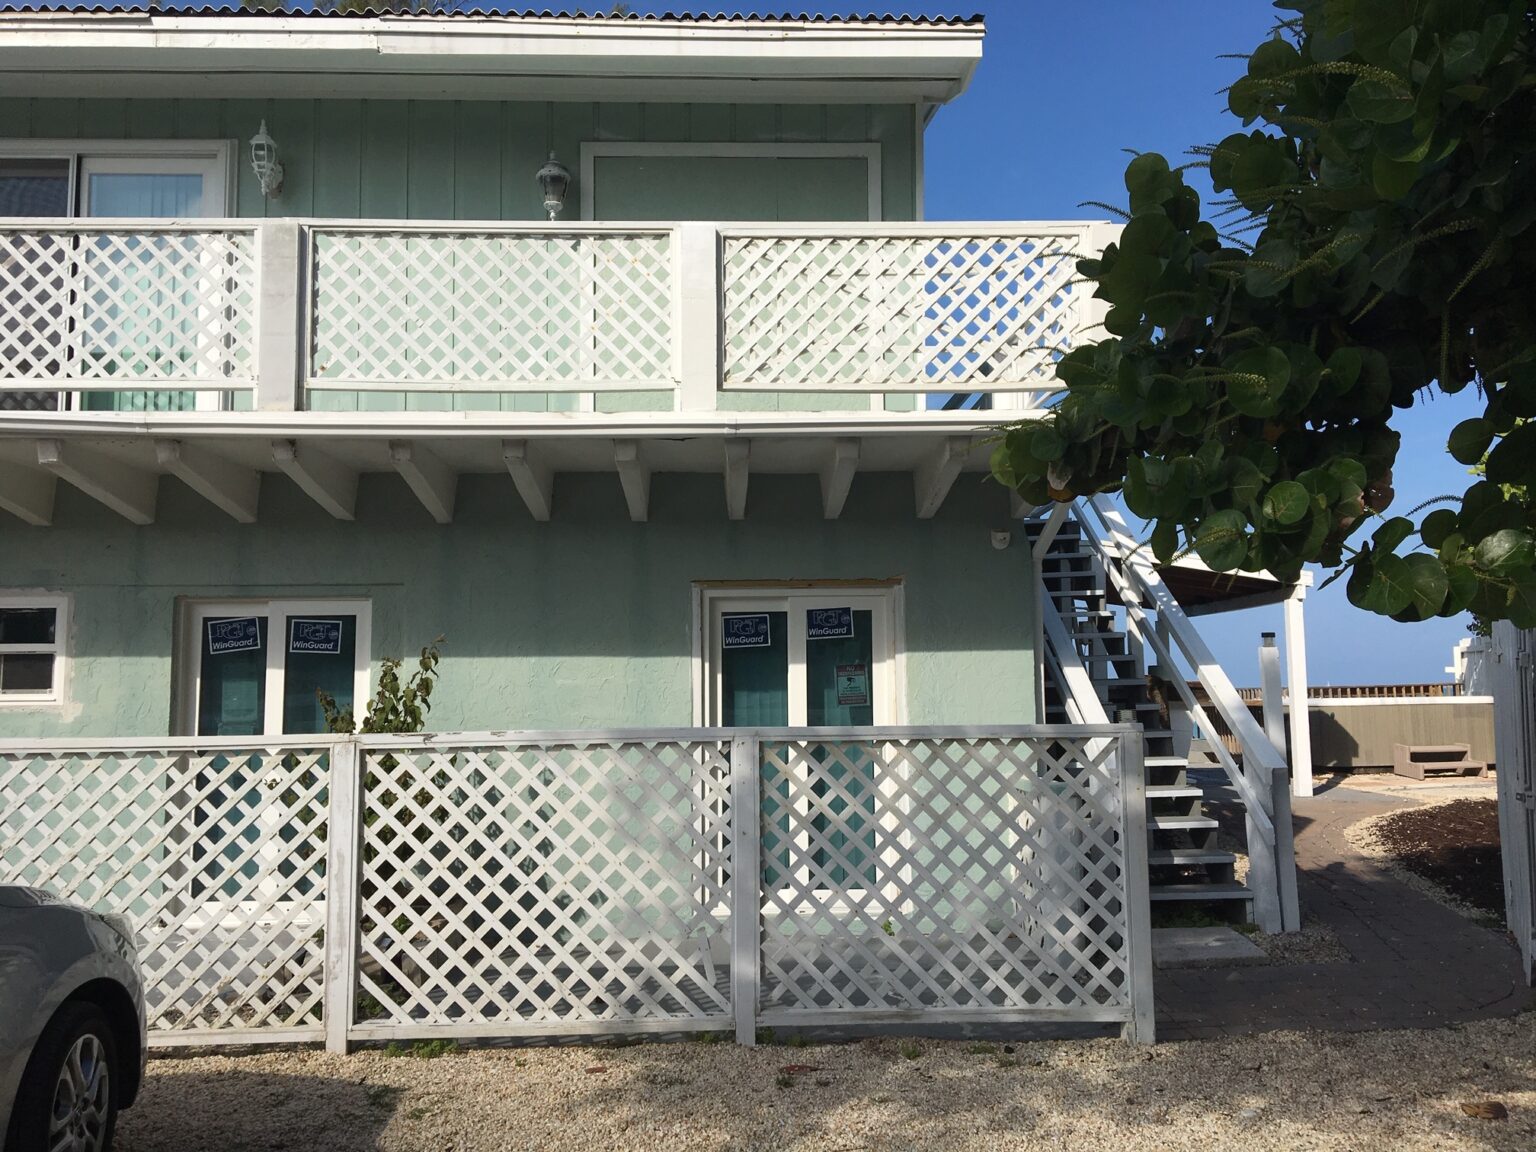 Seabreeze Condo two story building